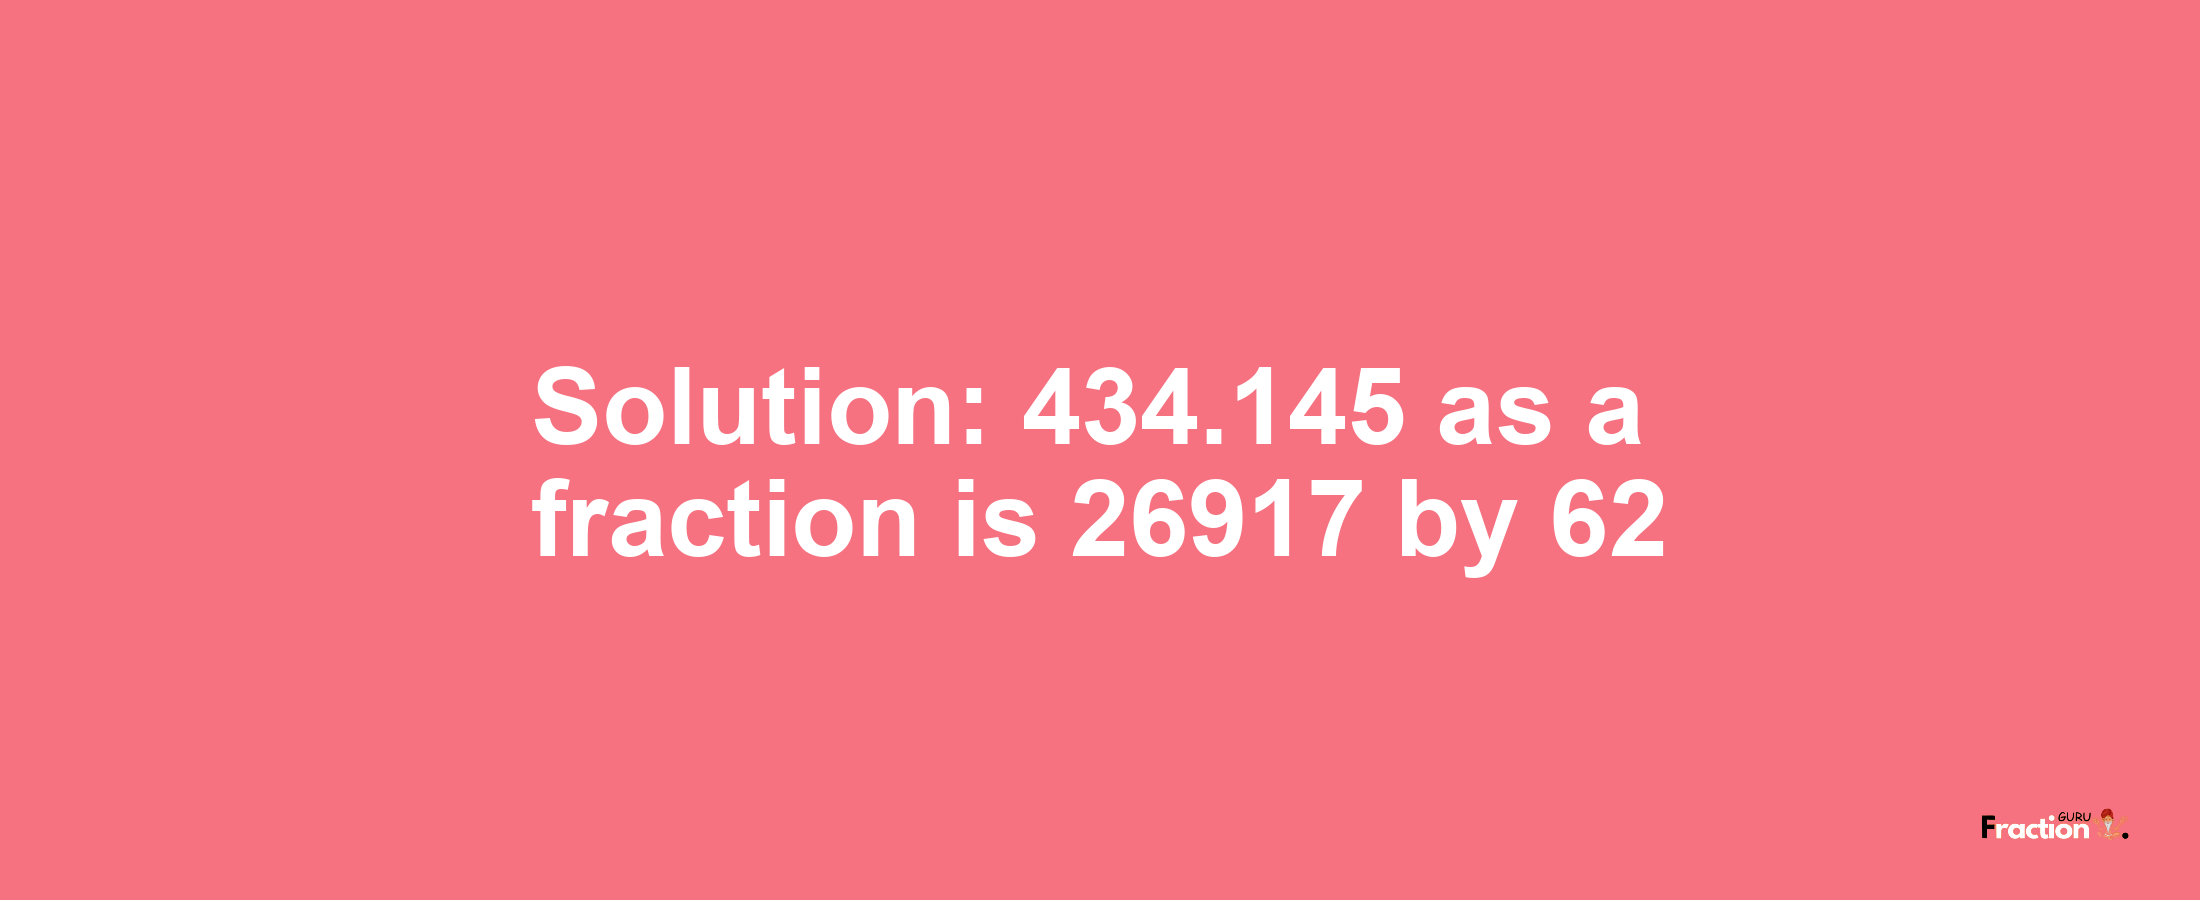 Solution:434.145 as a fraction is 26917/62